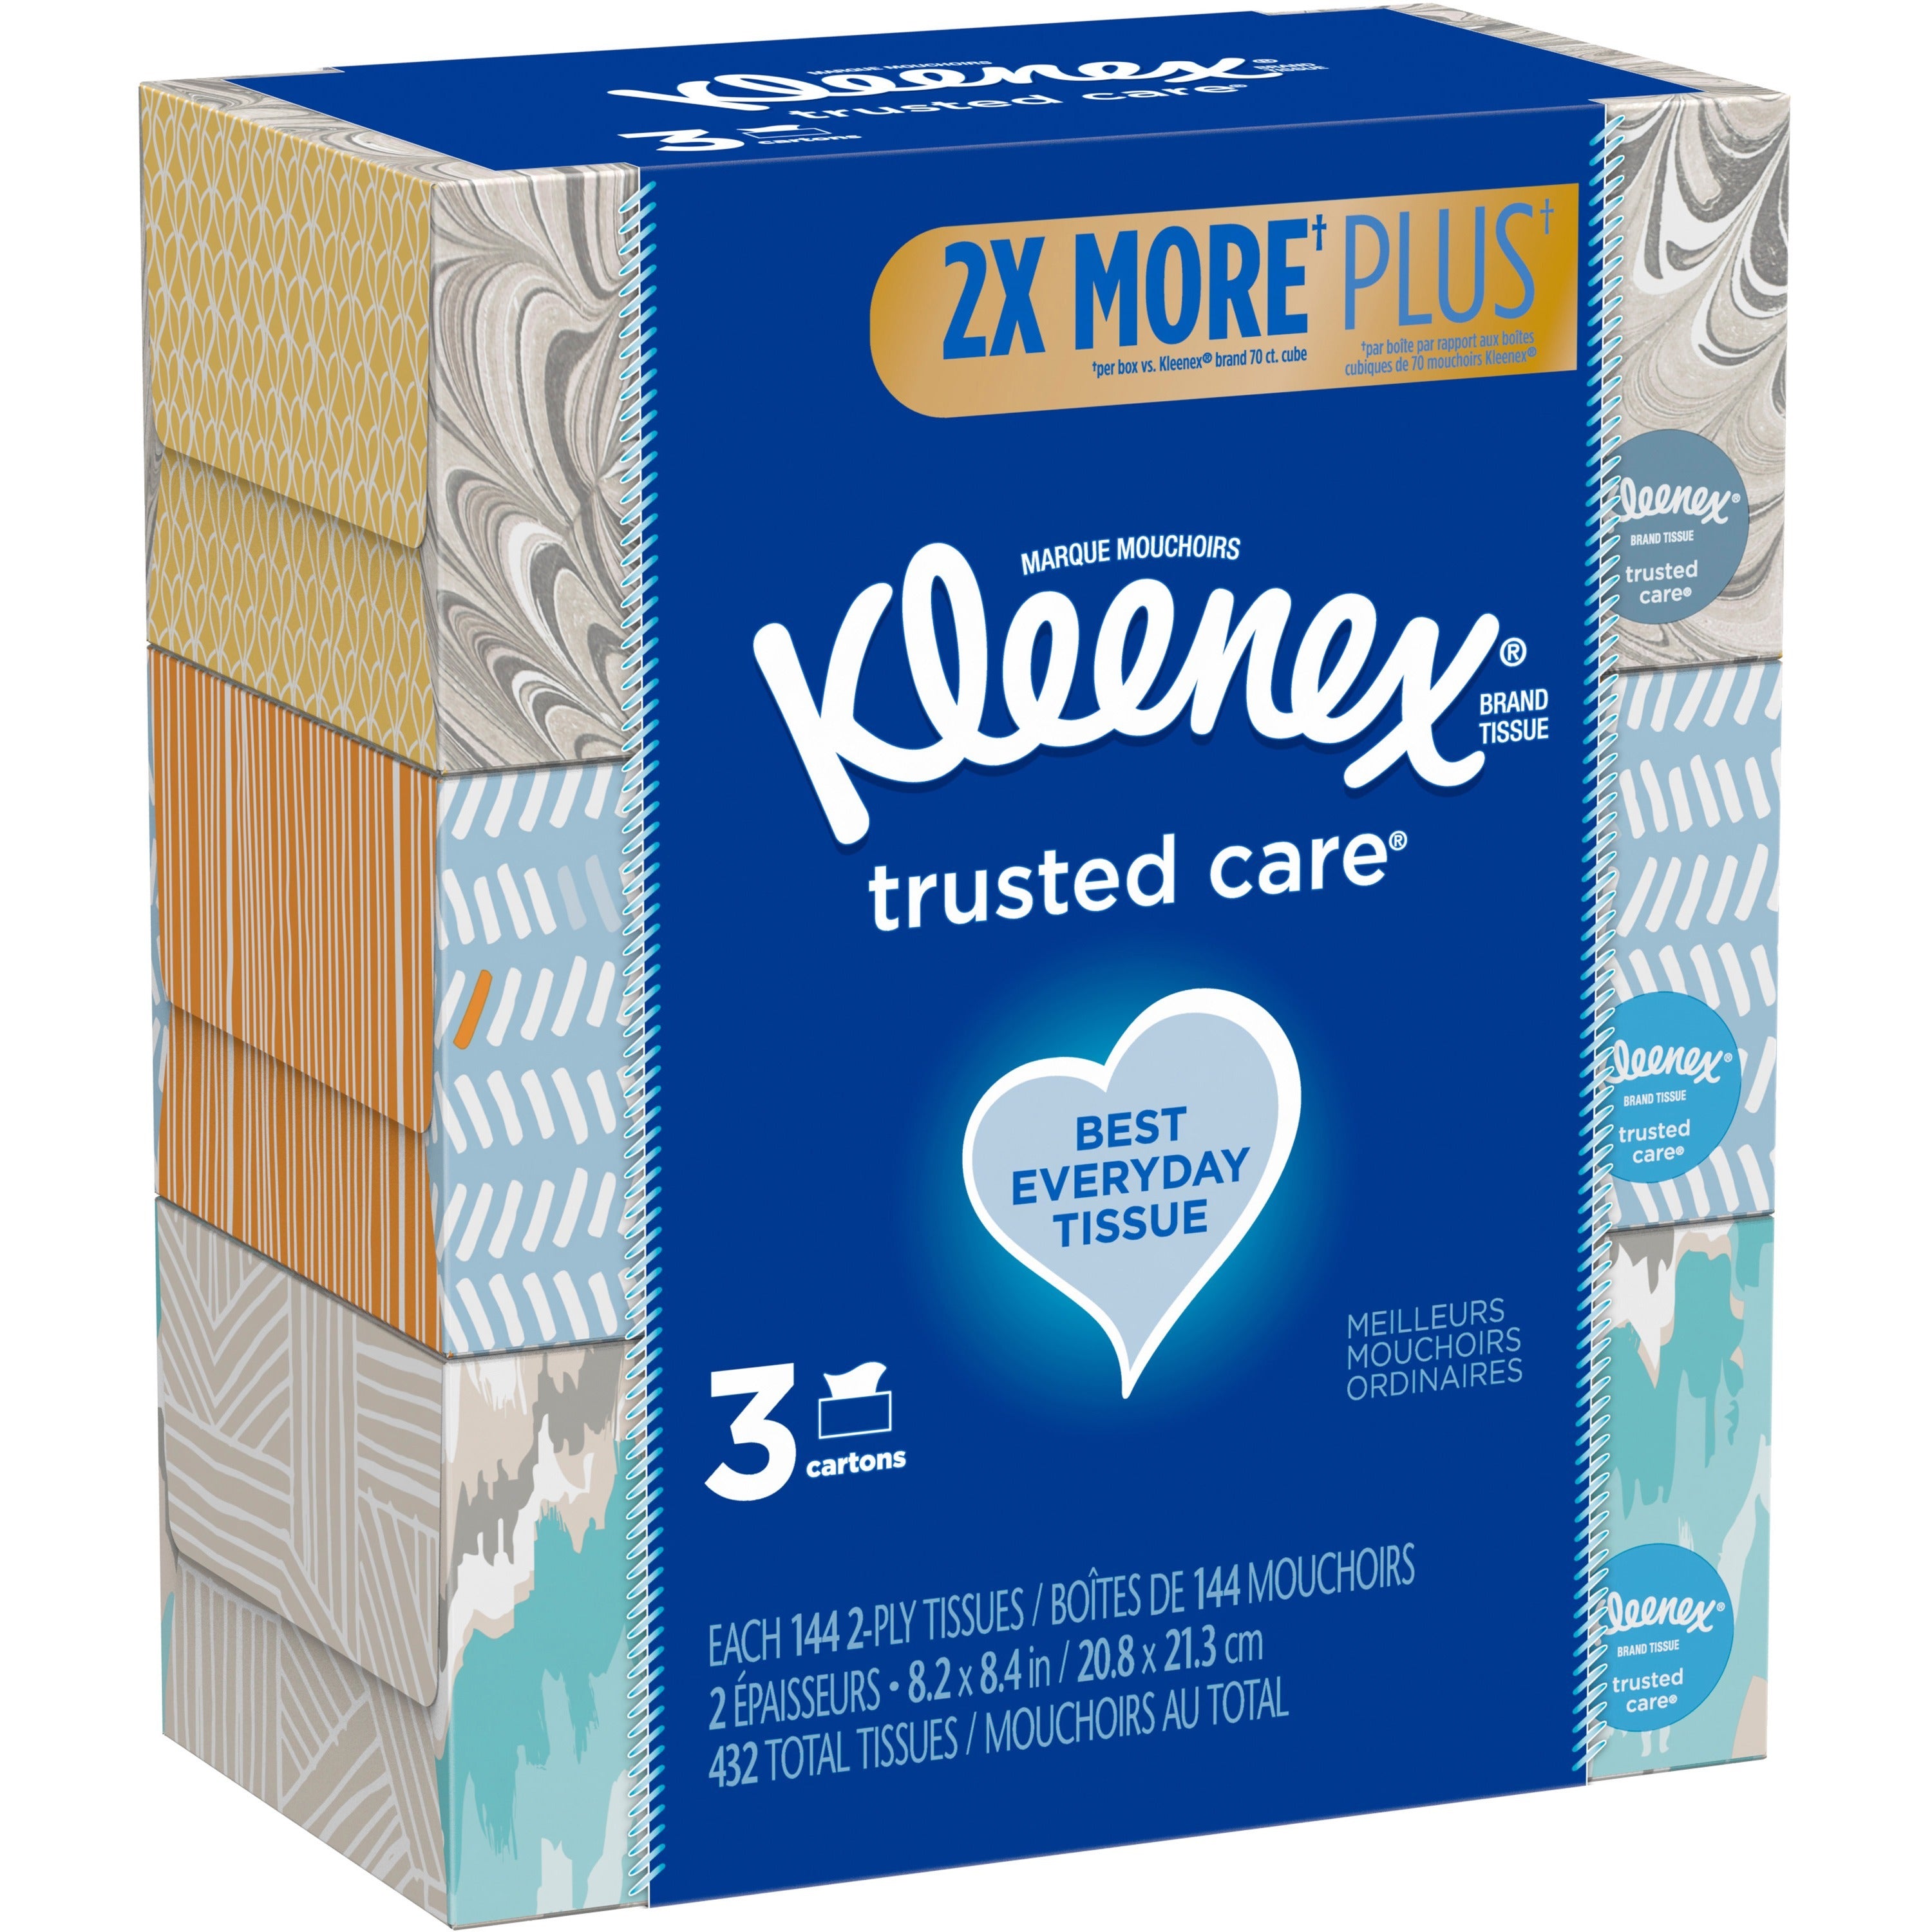 kleenex-trusted-care-facial-tissues-2-ply-820-x-840-white-soft-strong-absorbent-durable-for-home-office-school-144-per-box-3-pack_kcc50219 - 1